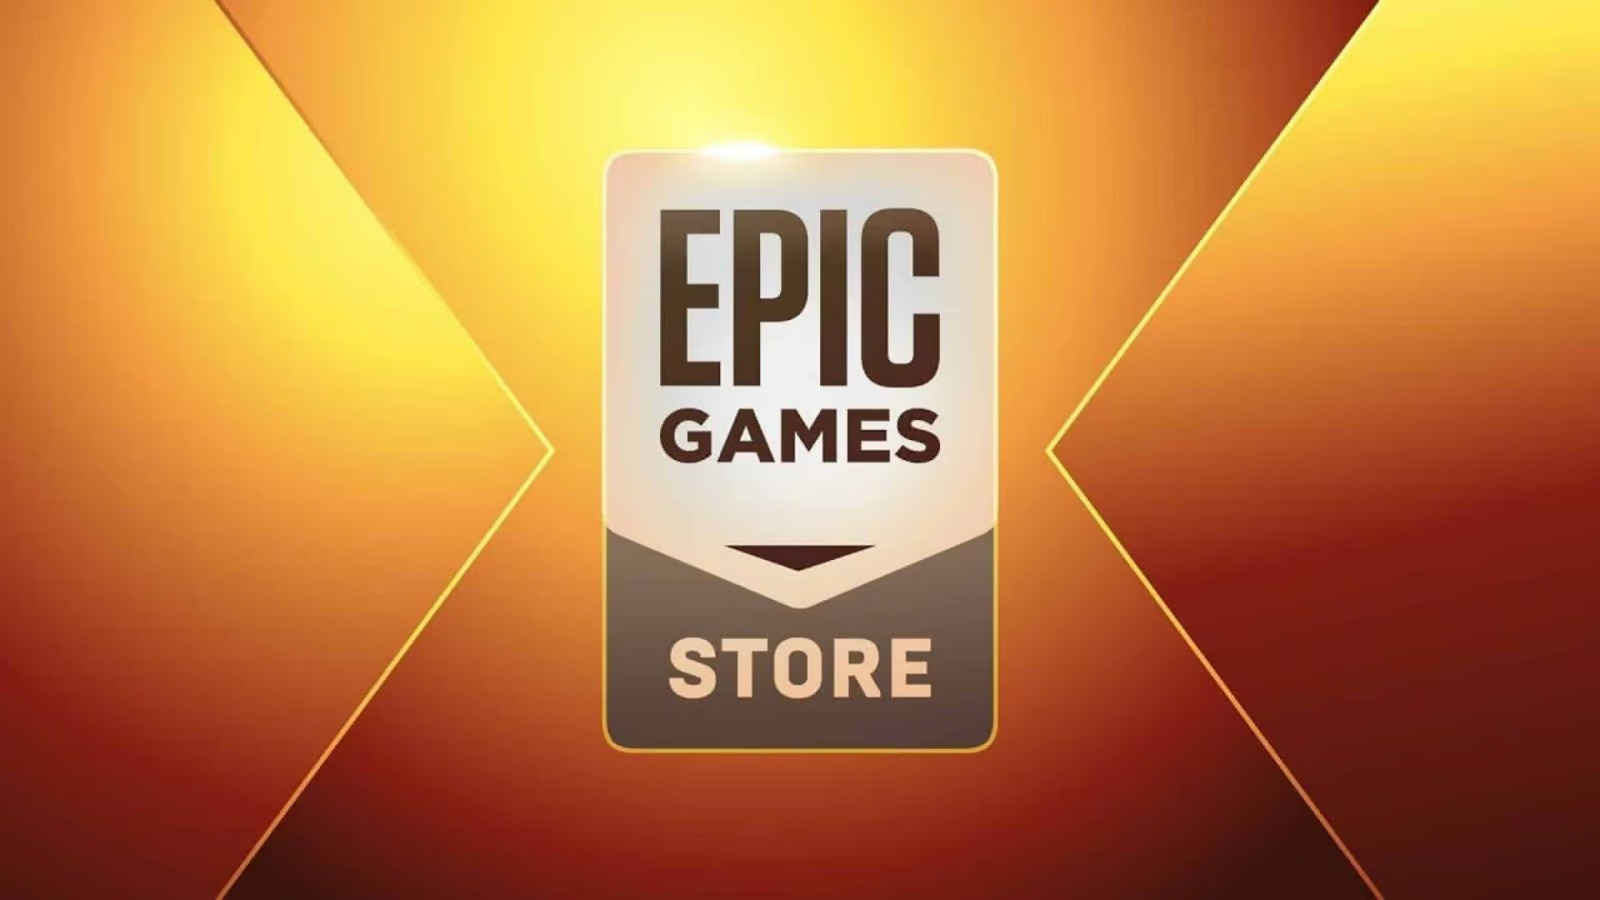 Epic Games confirms free games will continue in 2022, shares store